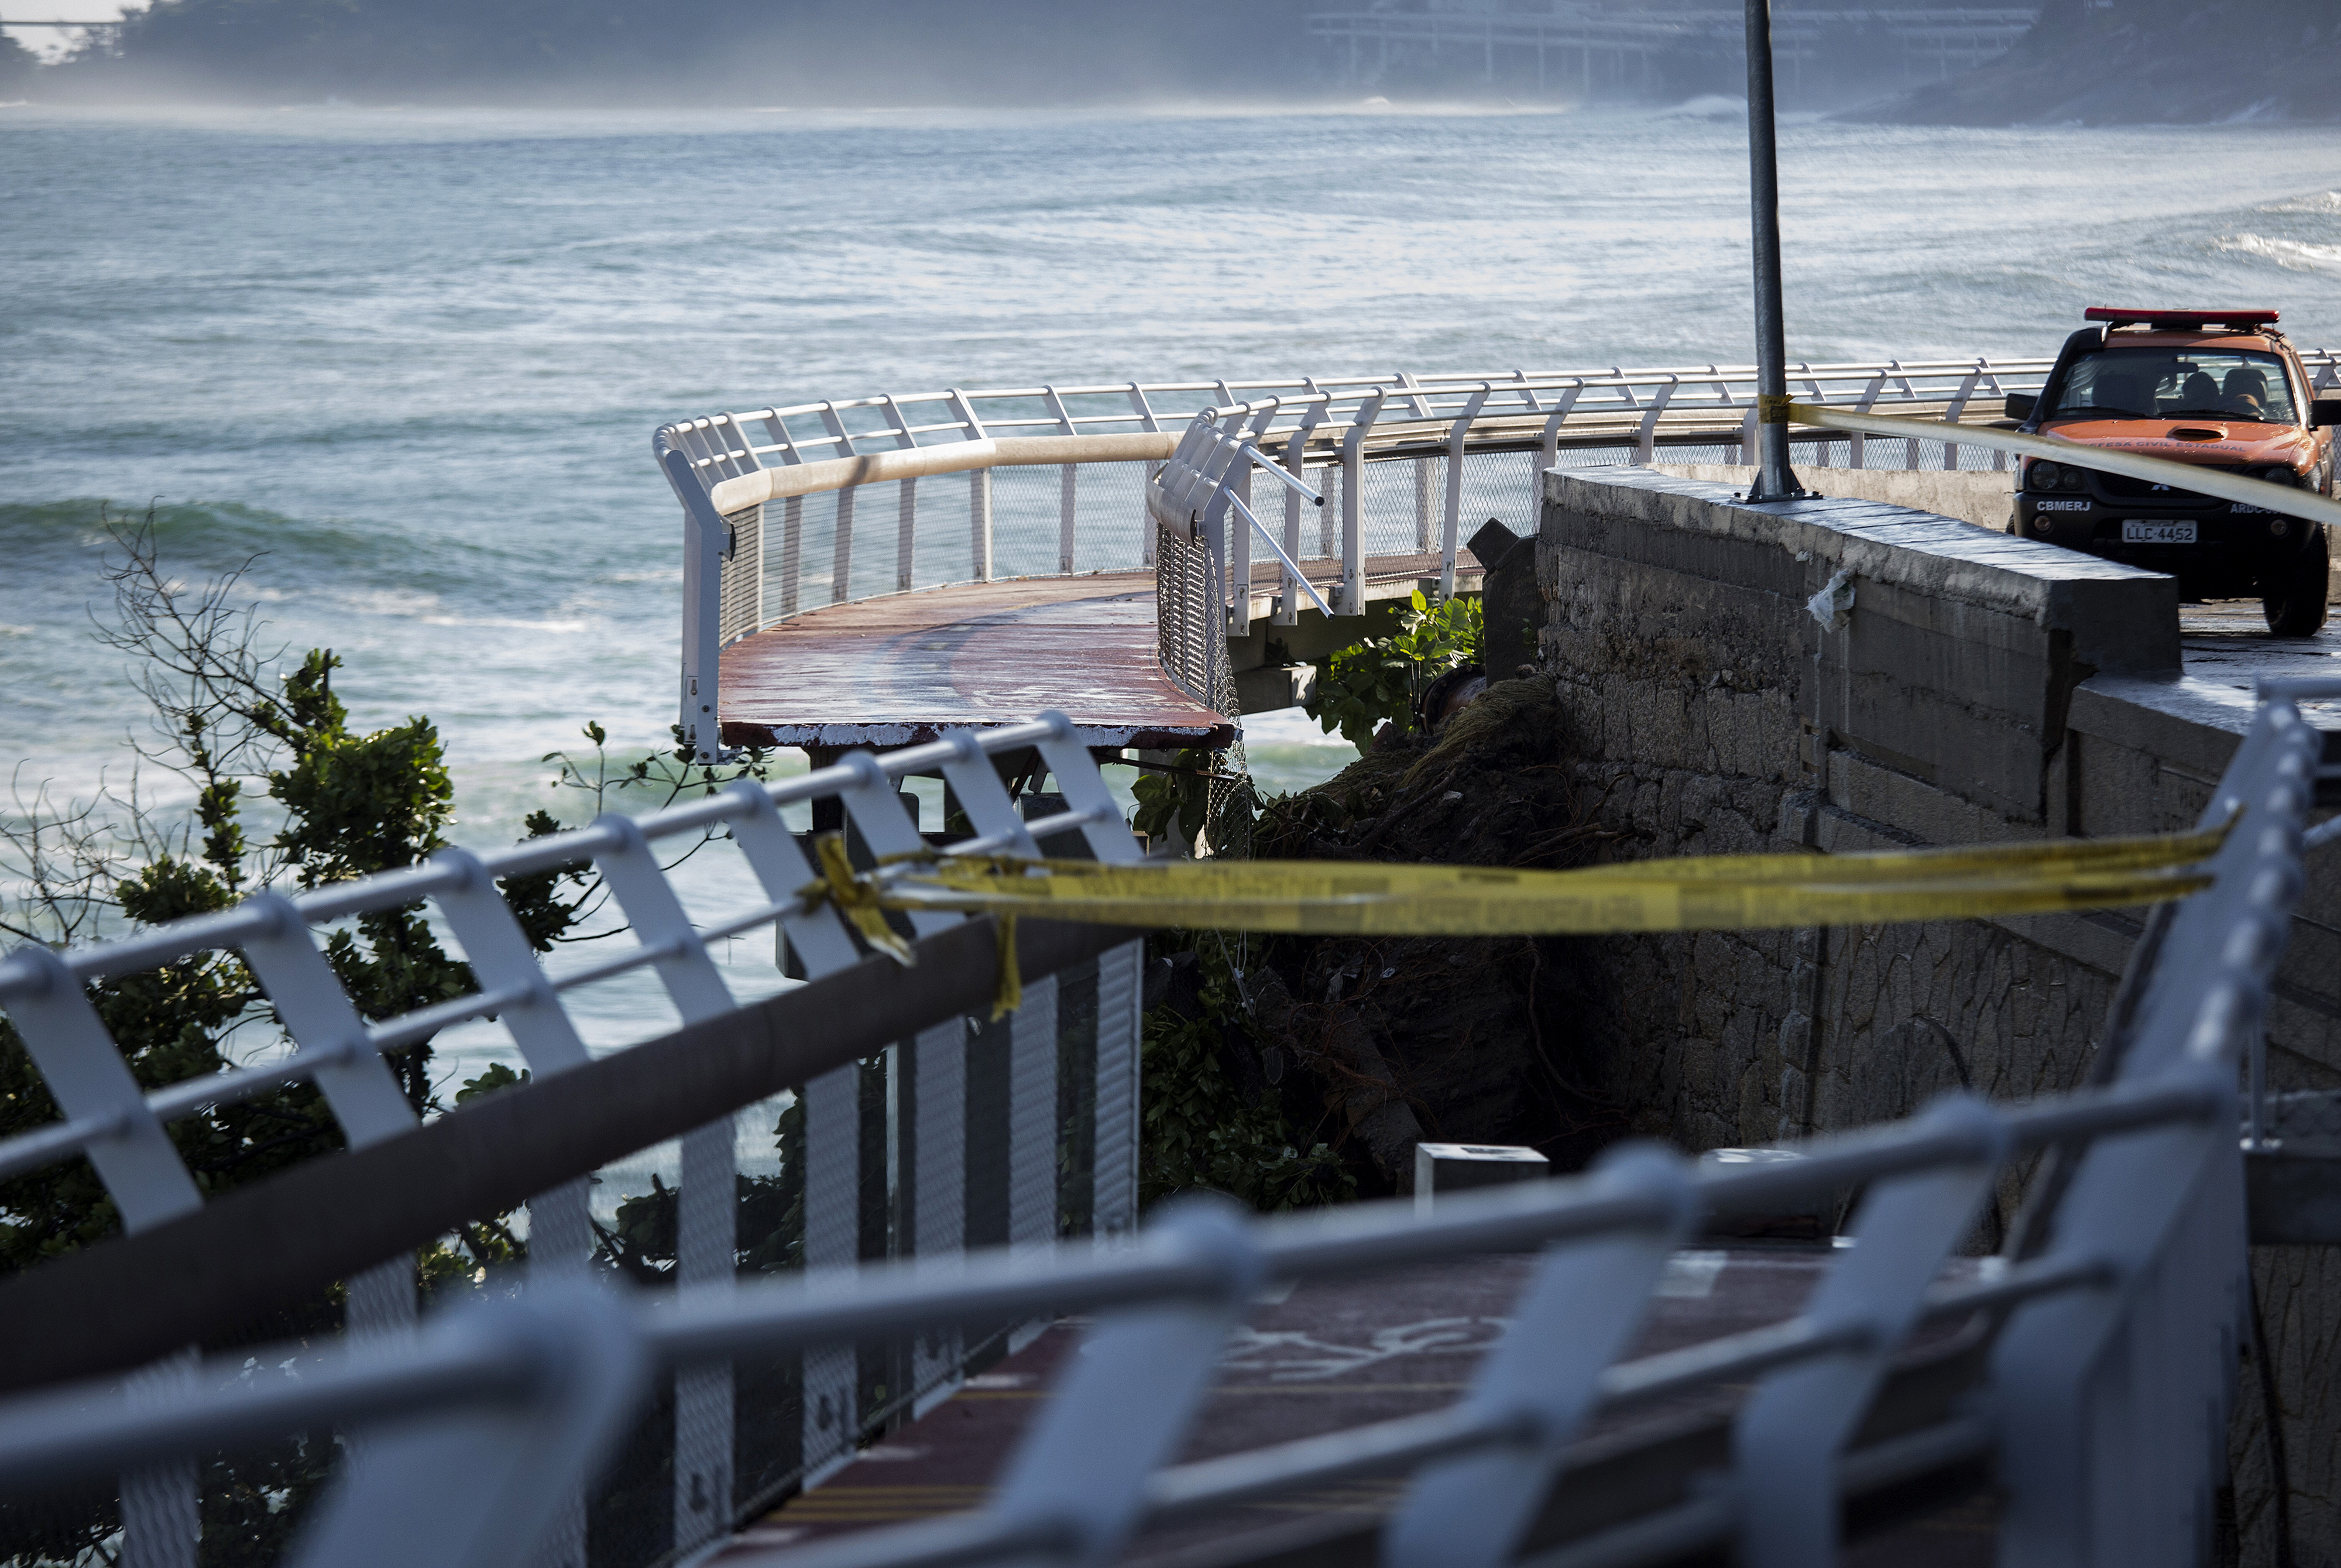 Damage is seen at the site of a collapsed section of a bicycle path in Rio de Janeiro, Brazil, on April 21. (Nadia Sussman—Bloomberg/Getty Images)